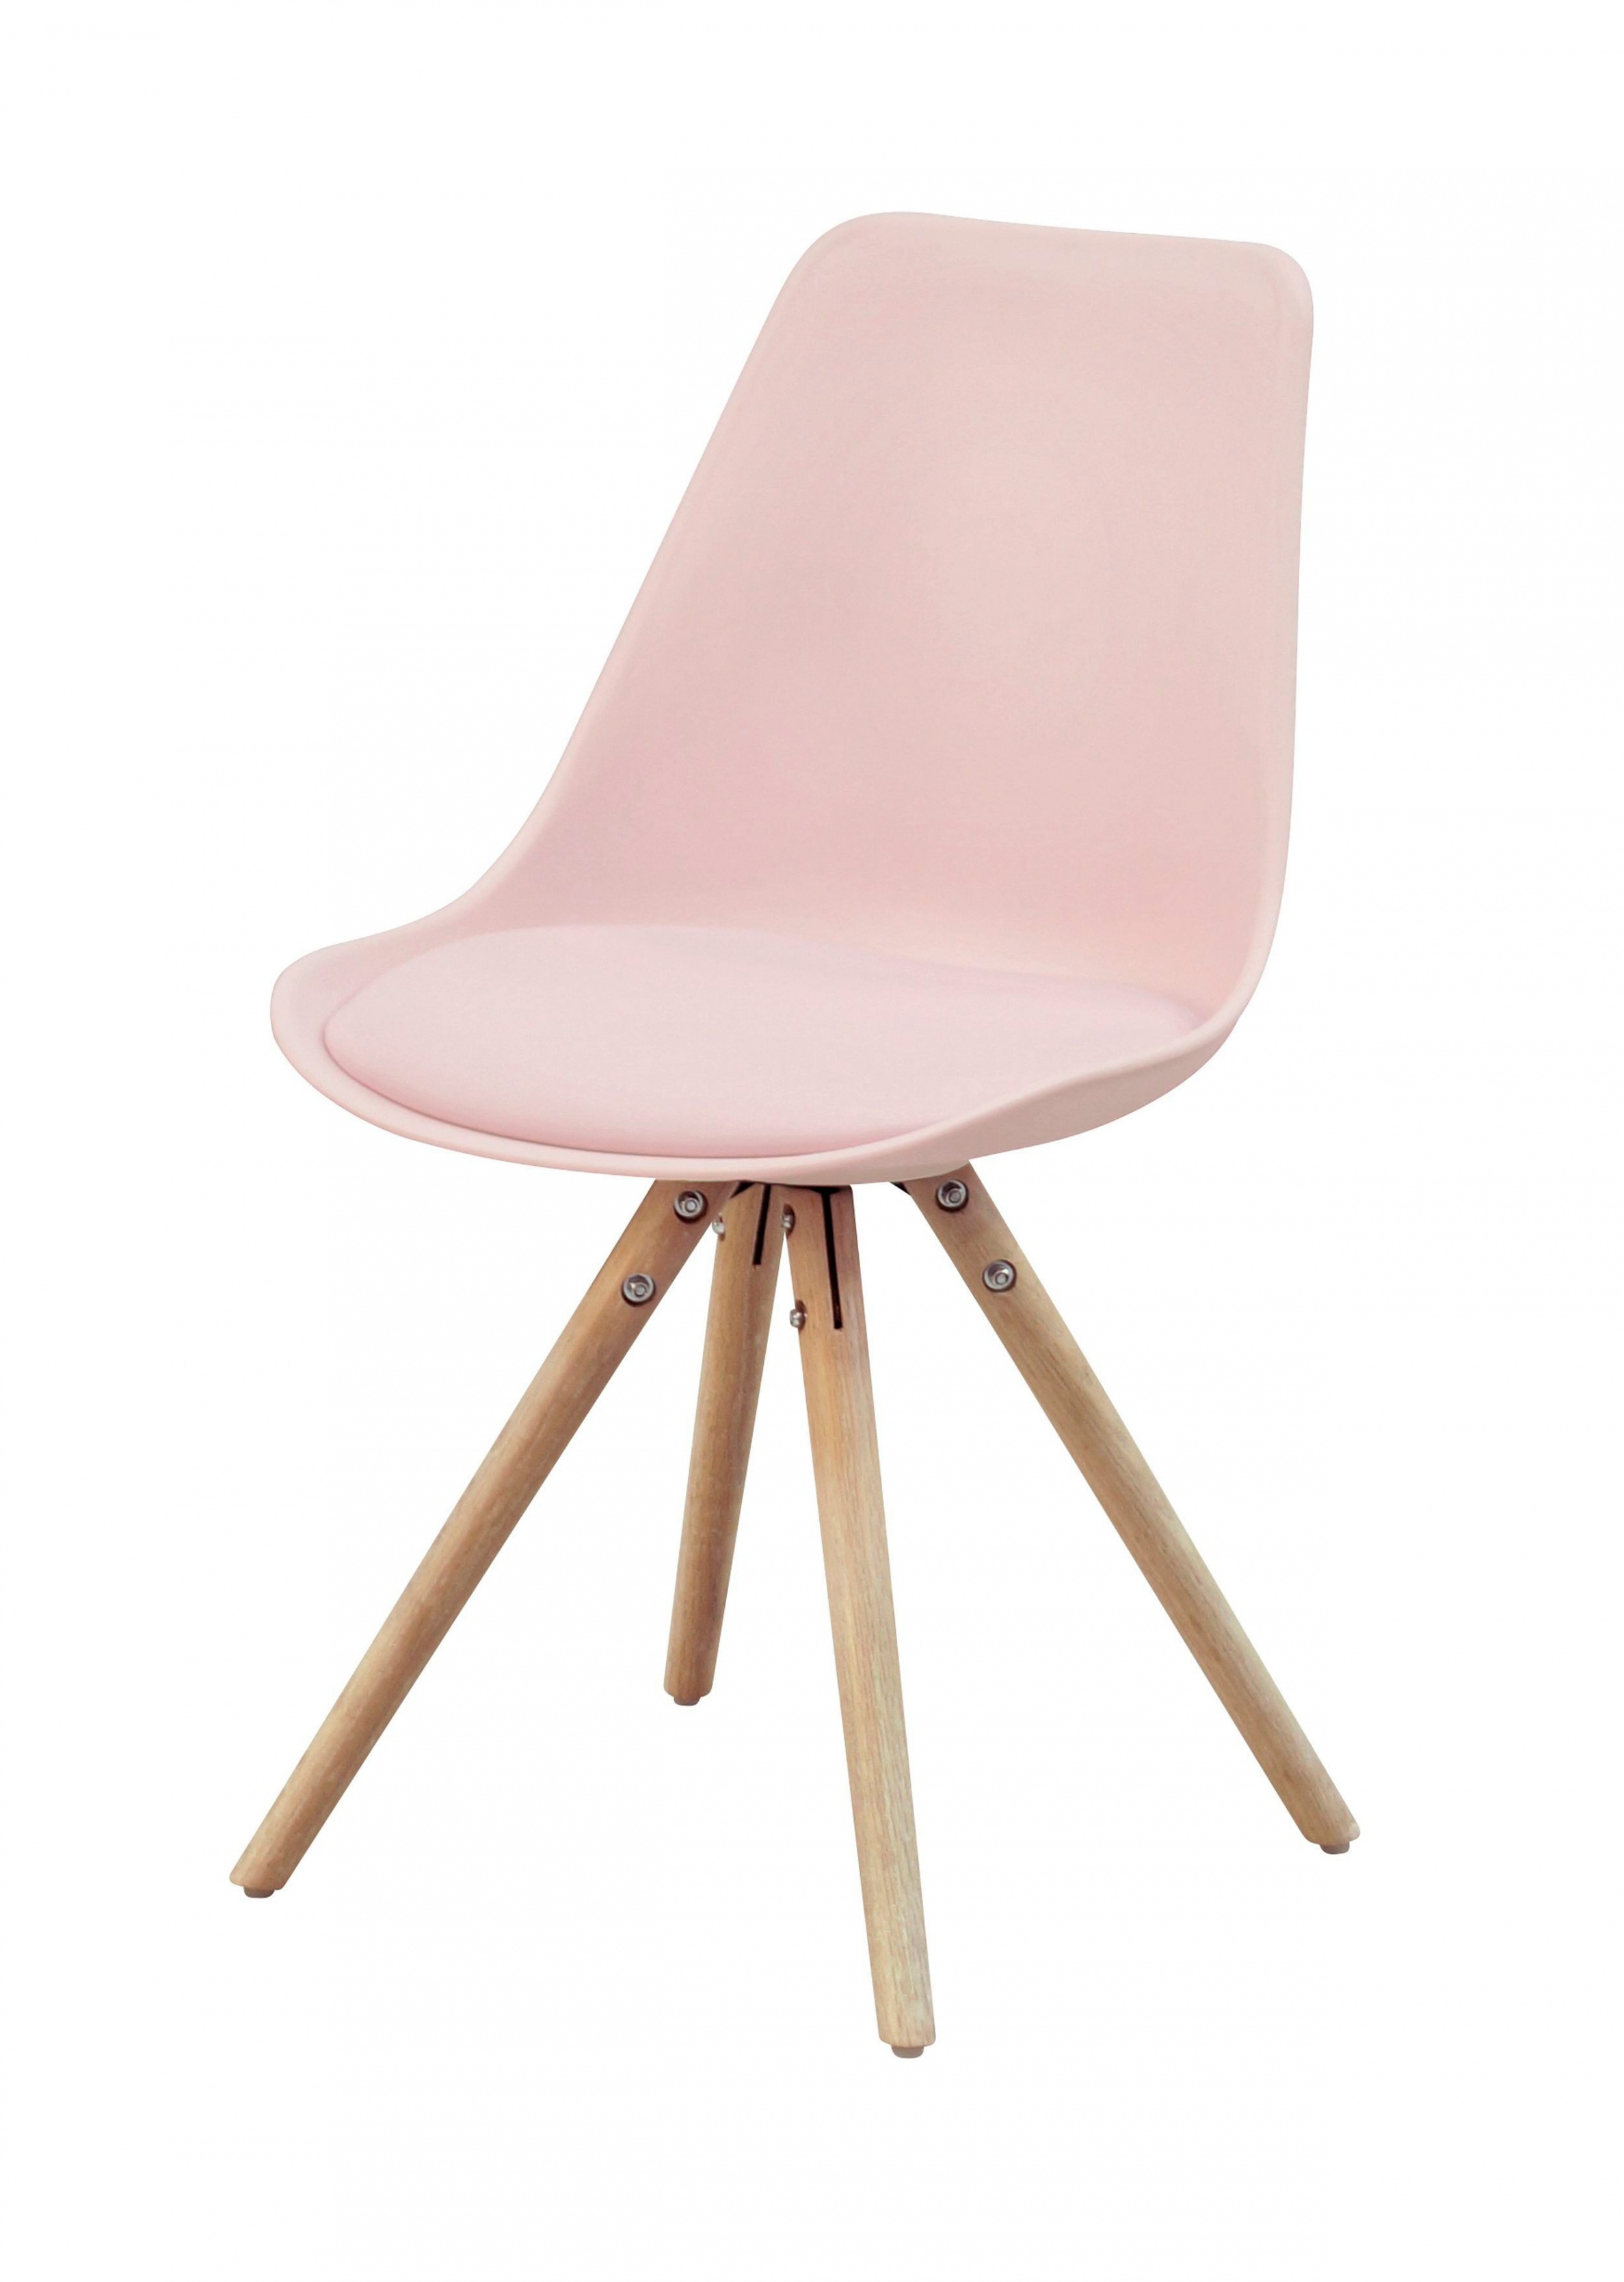 Chaise scandinave rose pastel